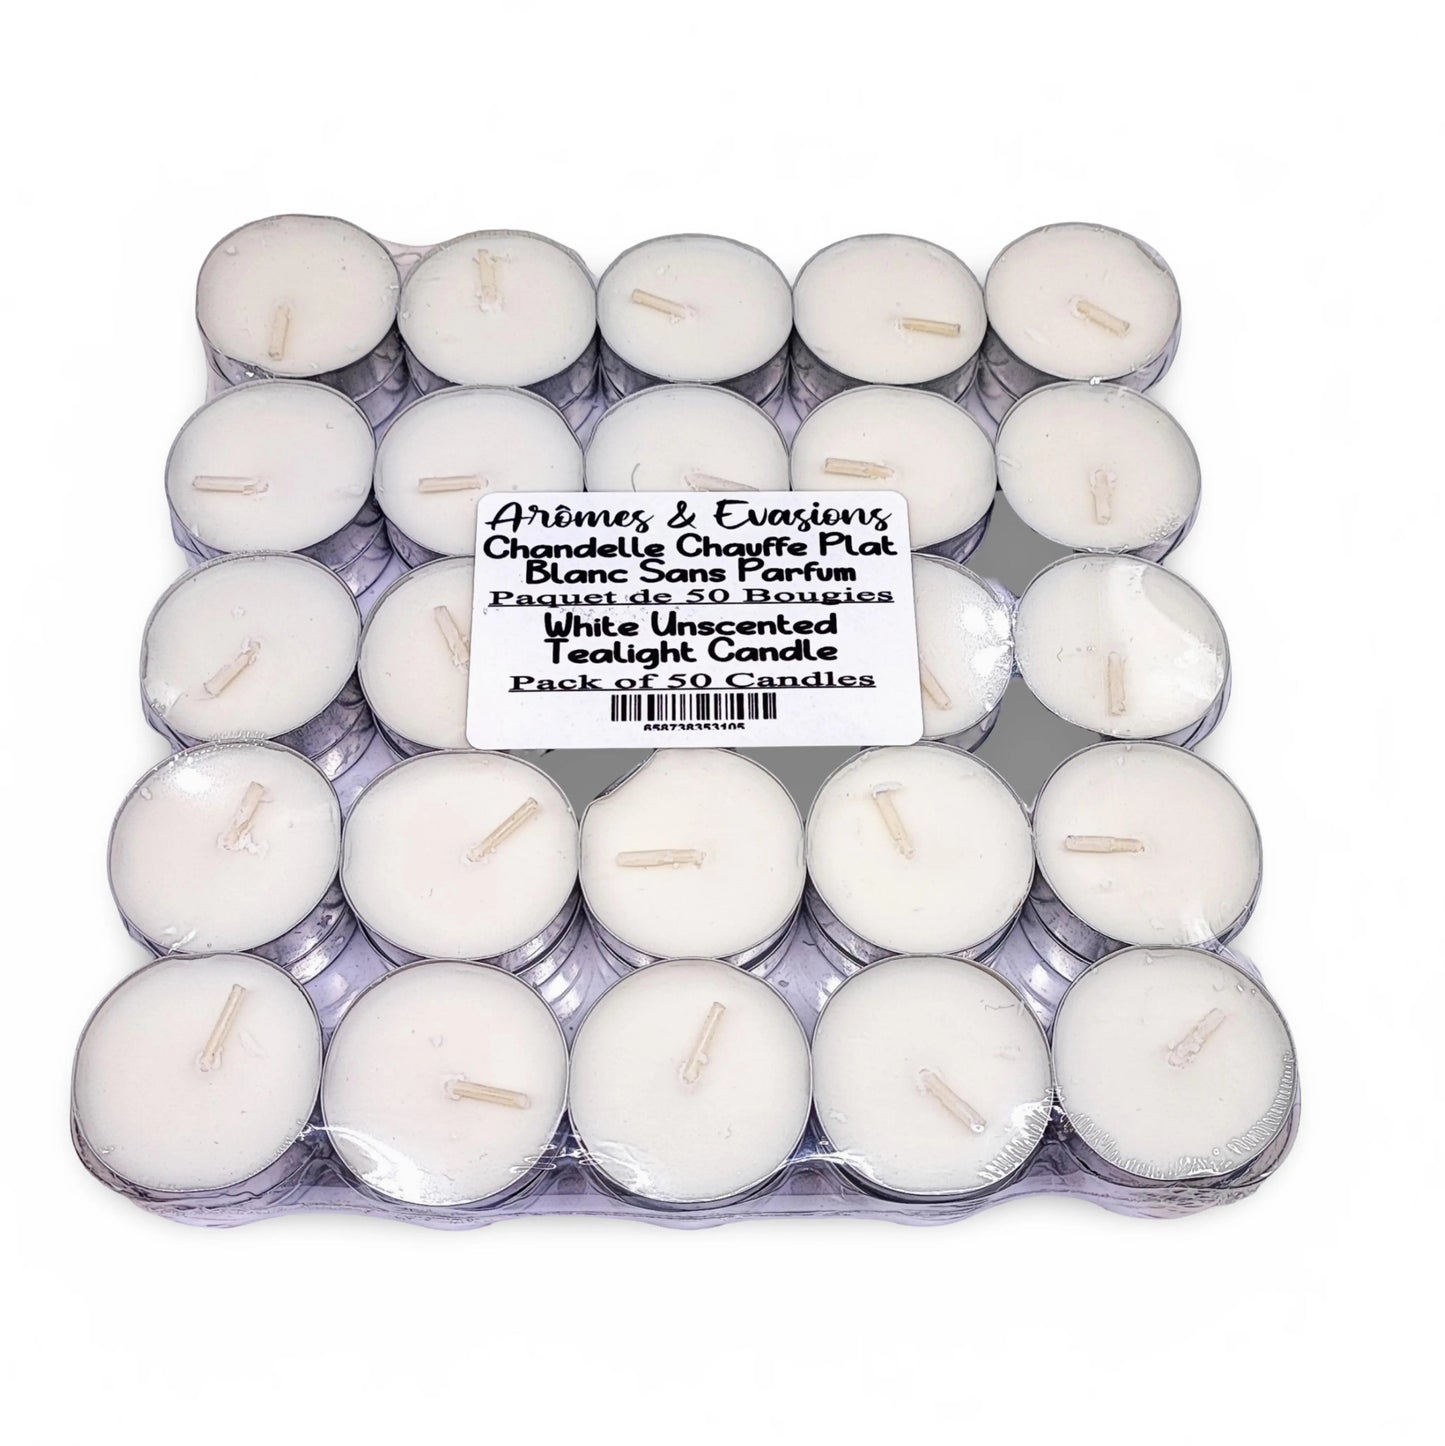 Candle -Tealights -White -Pack of 50 -T-Lights -Arômes & Évasions